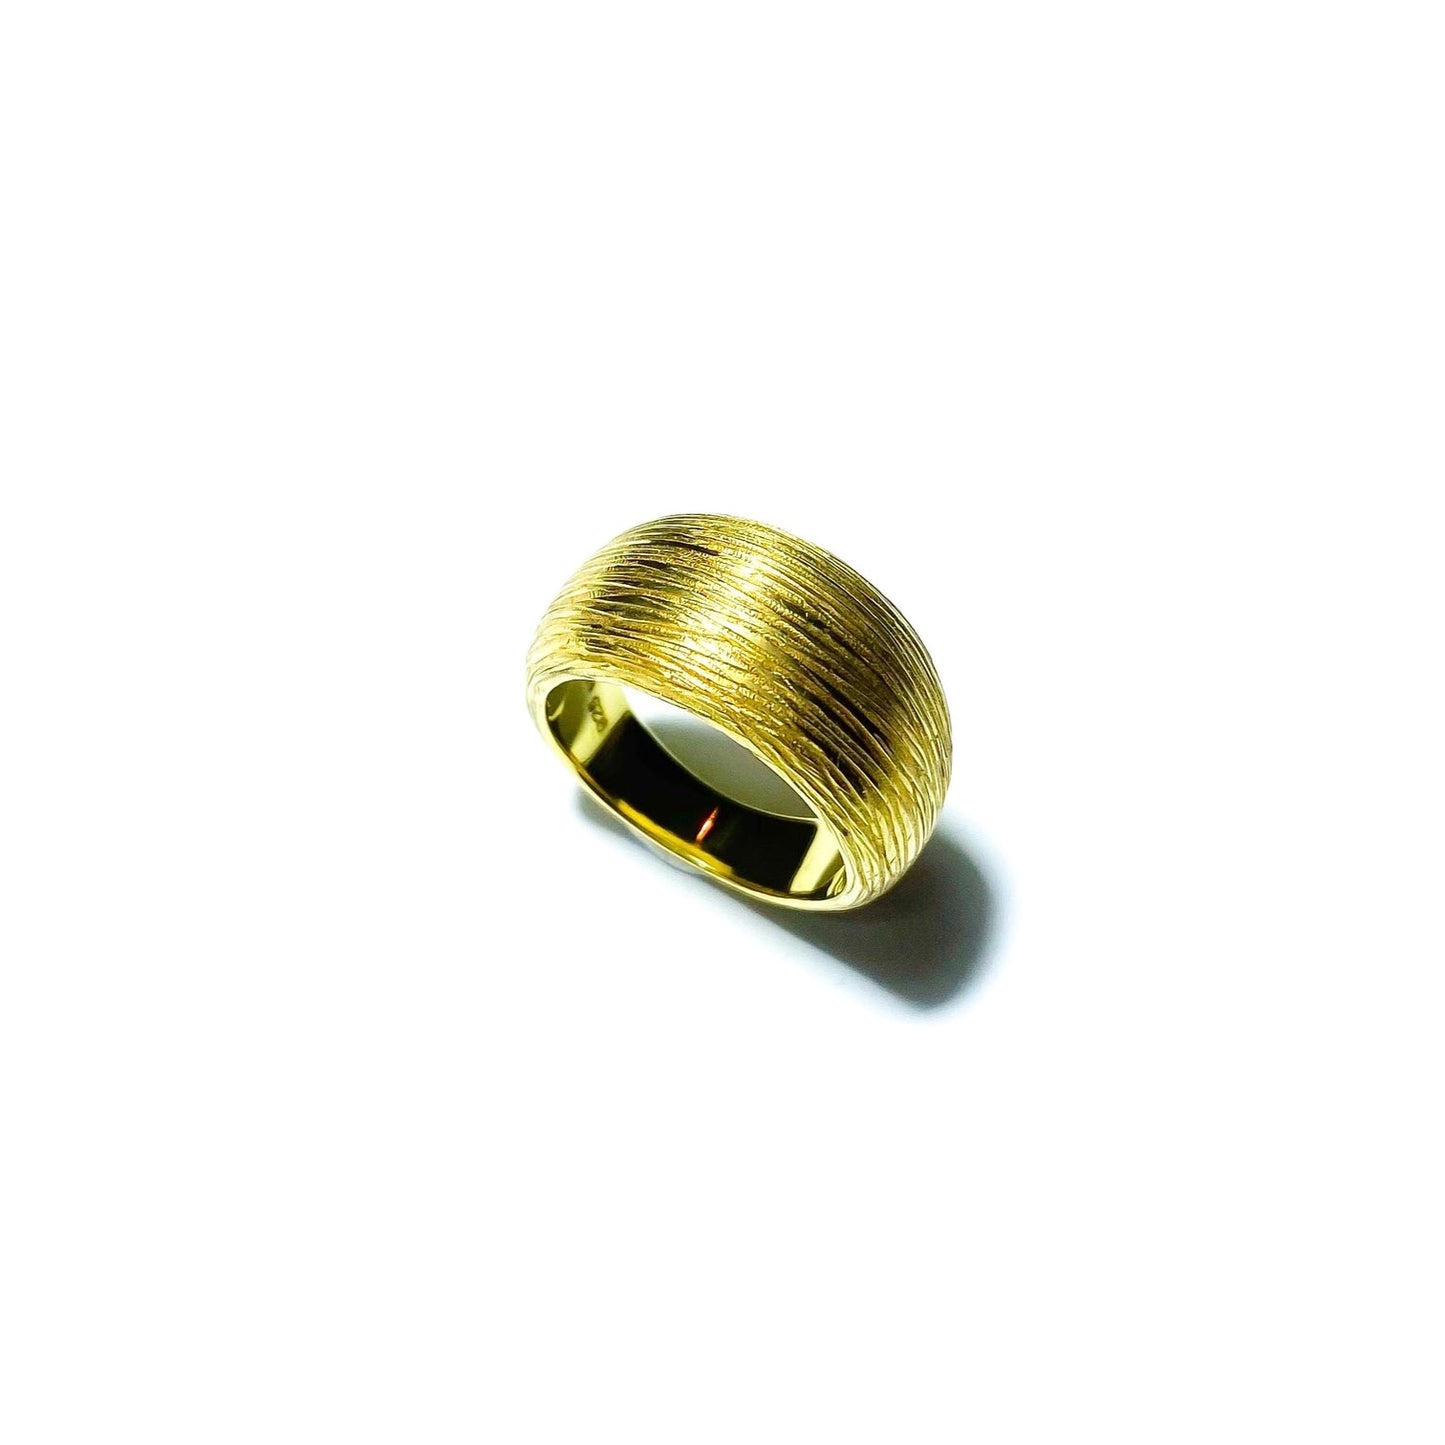 Bubble Signet gold plated silver ring, top view.